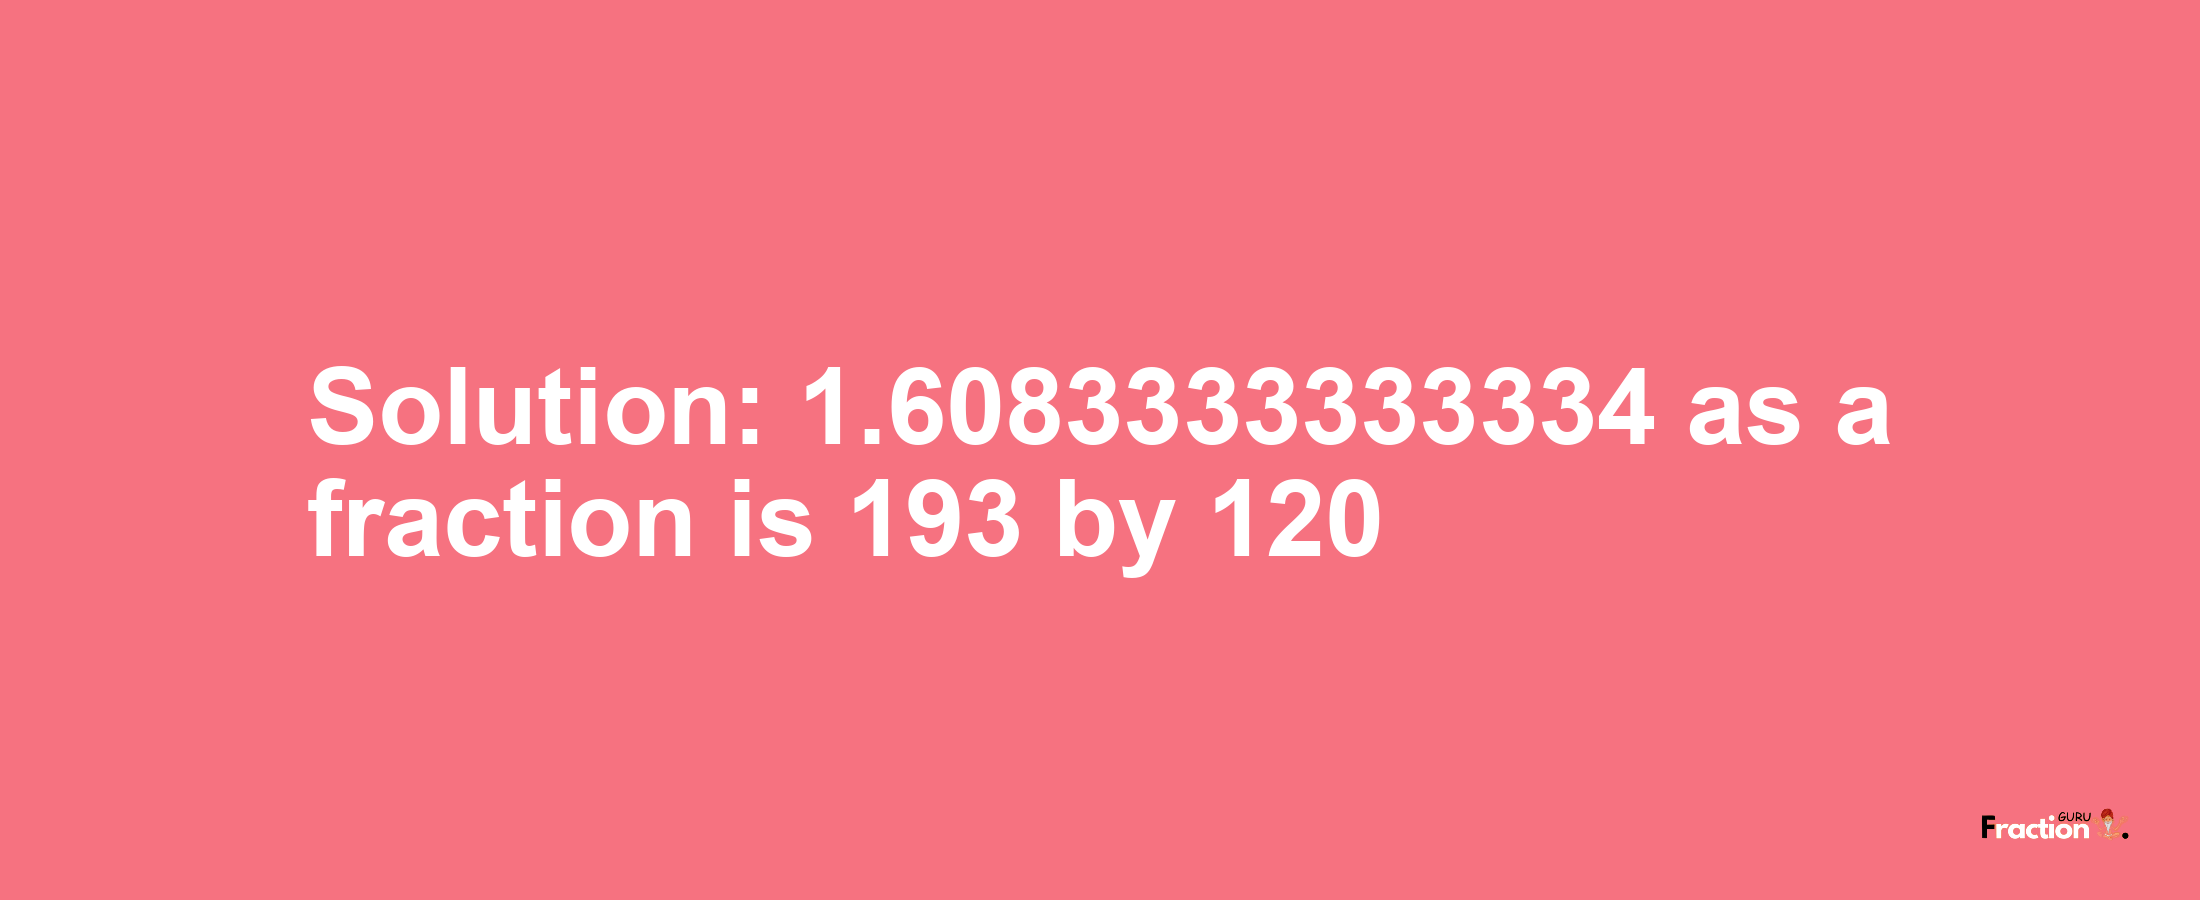 Solution:1.6083333333334 as a fraction is 193/120